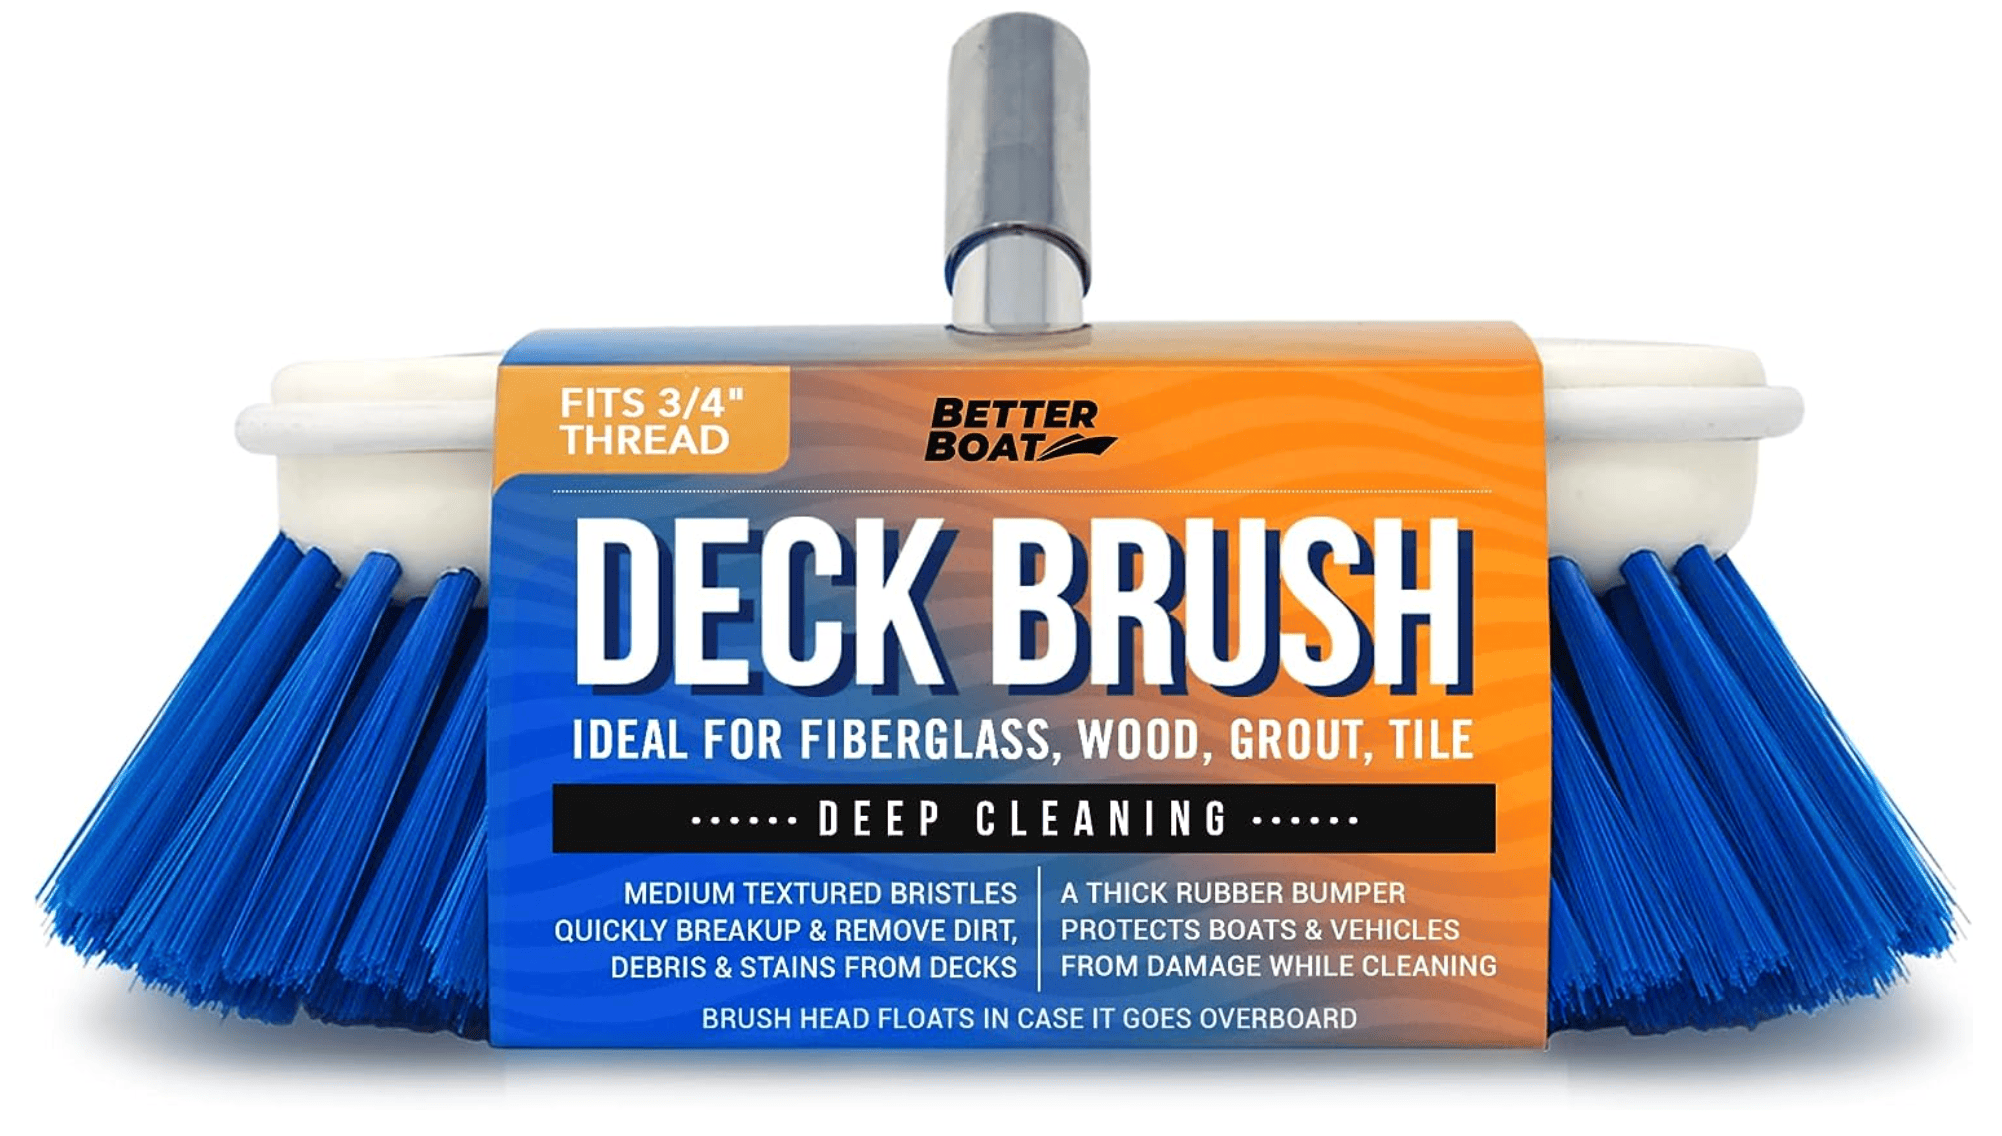 Reviewers Say This Grout Brush Makes Deep Cleaning So Much Easier